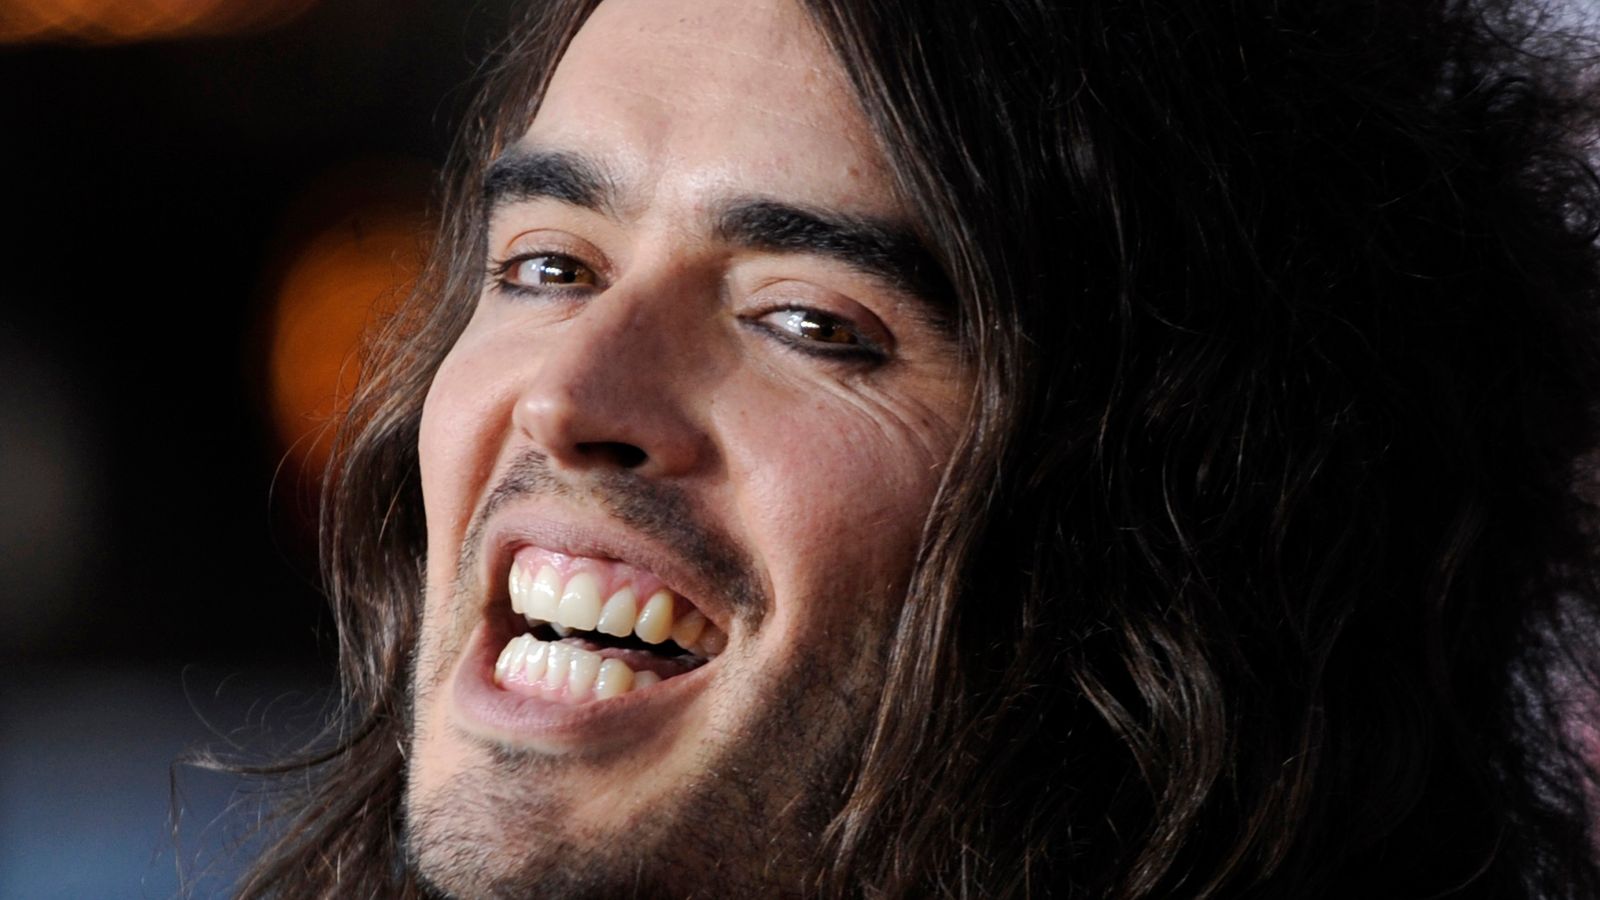 Russell Brand faces new allegations he 'laughed' on radio show after 'exposing himself to woman'